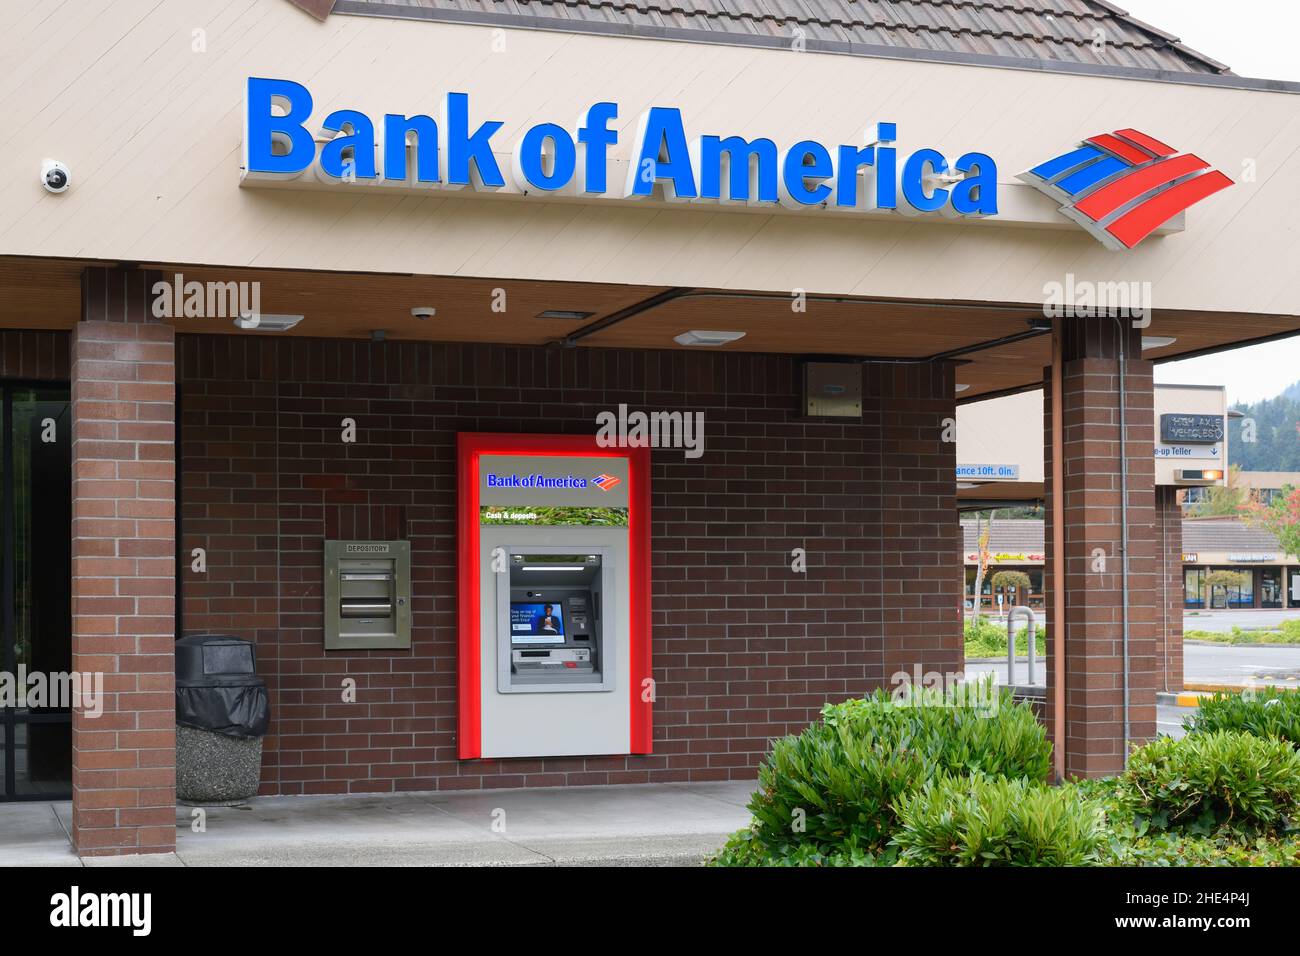 Bank Names in Usa  